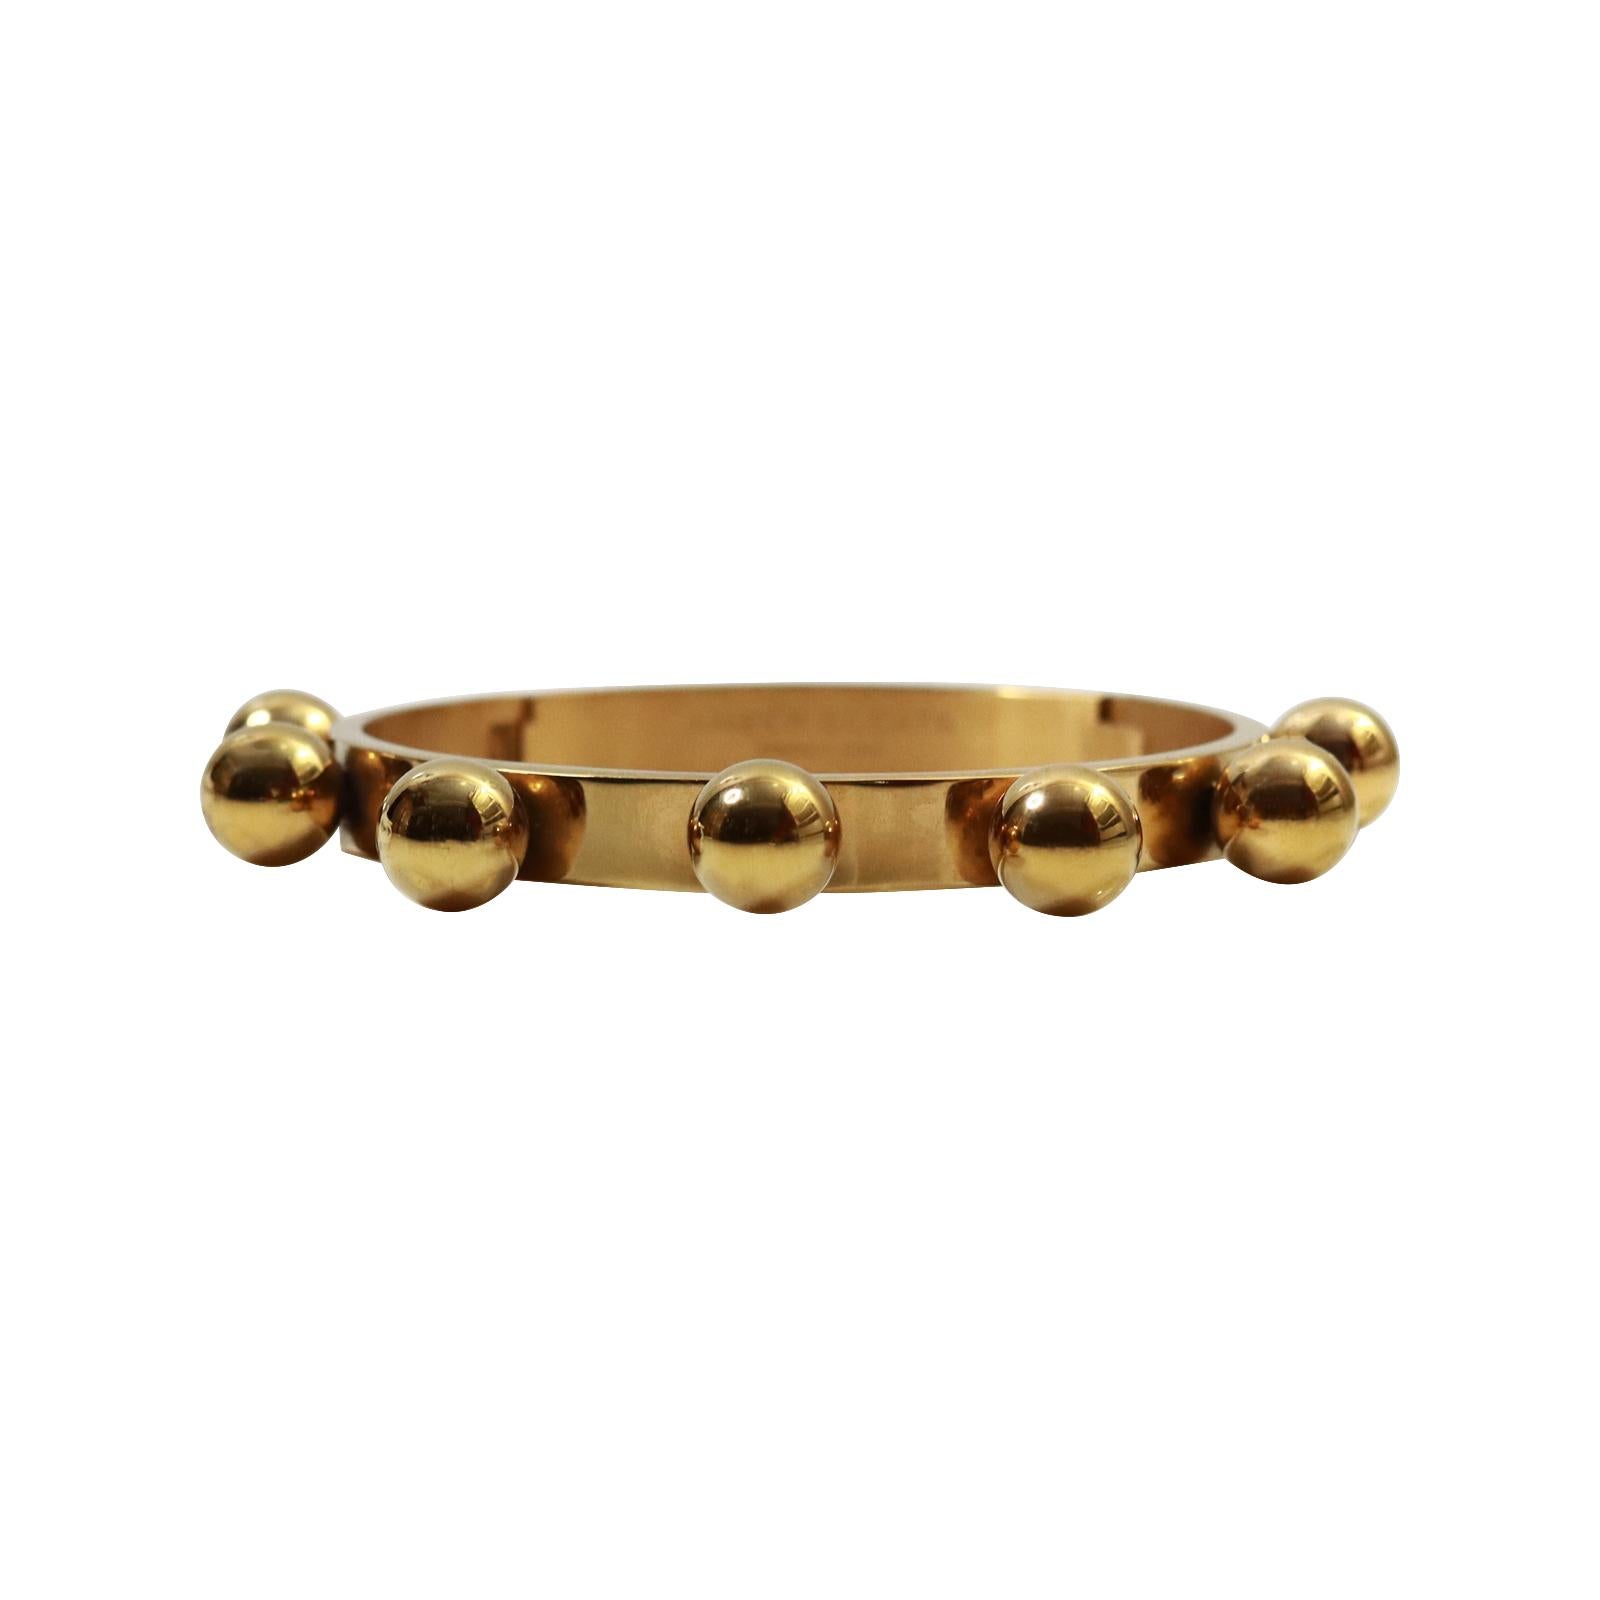 Vintage Gold Tone Heavy Bracelet With Fixed Balls Circa 1990s In Good Condition For Sale In New York, NY